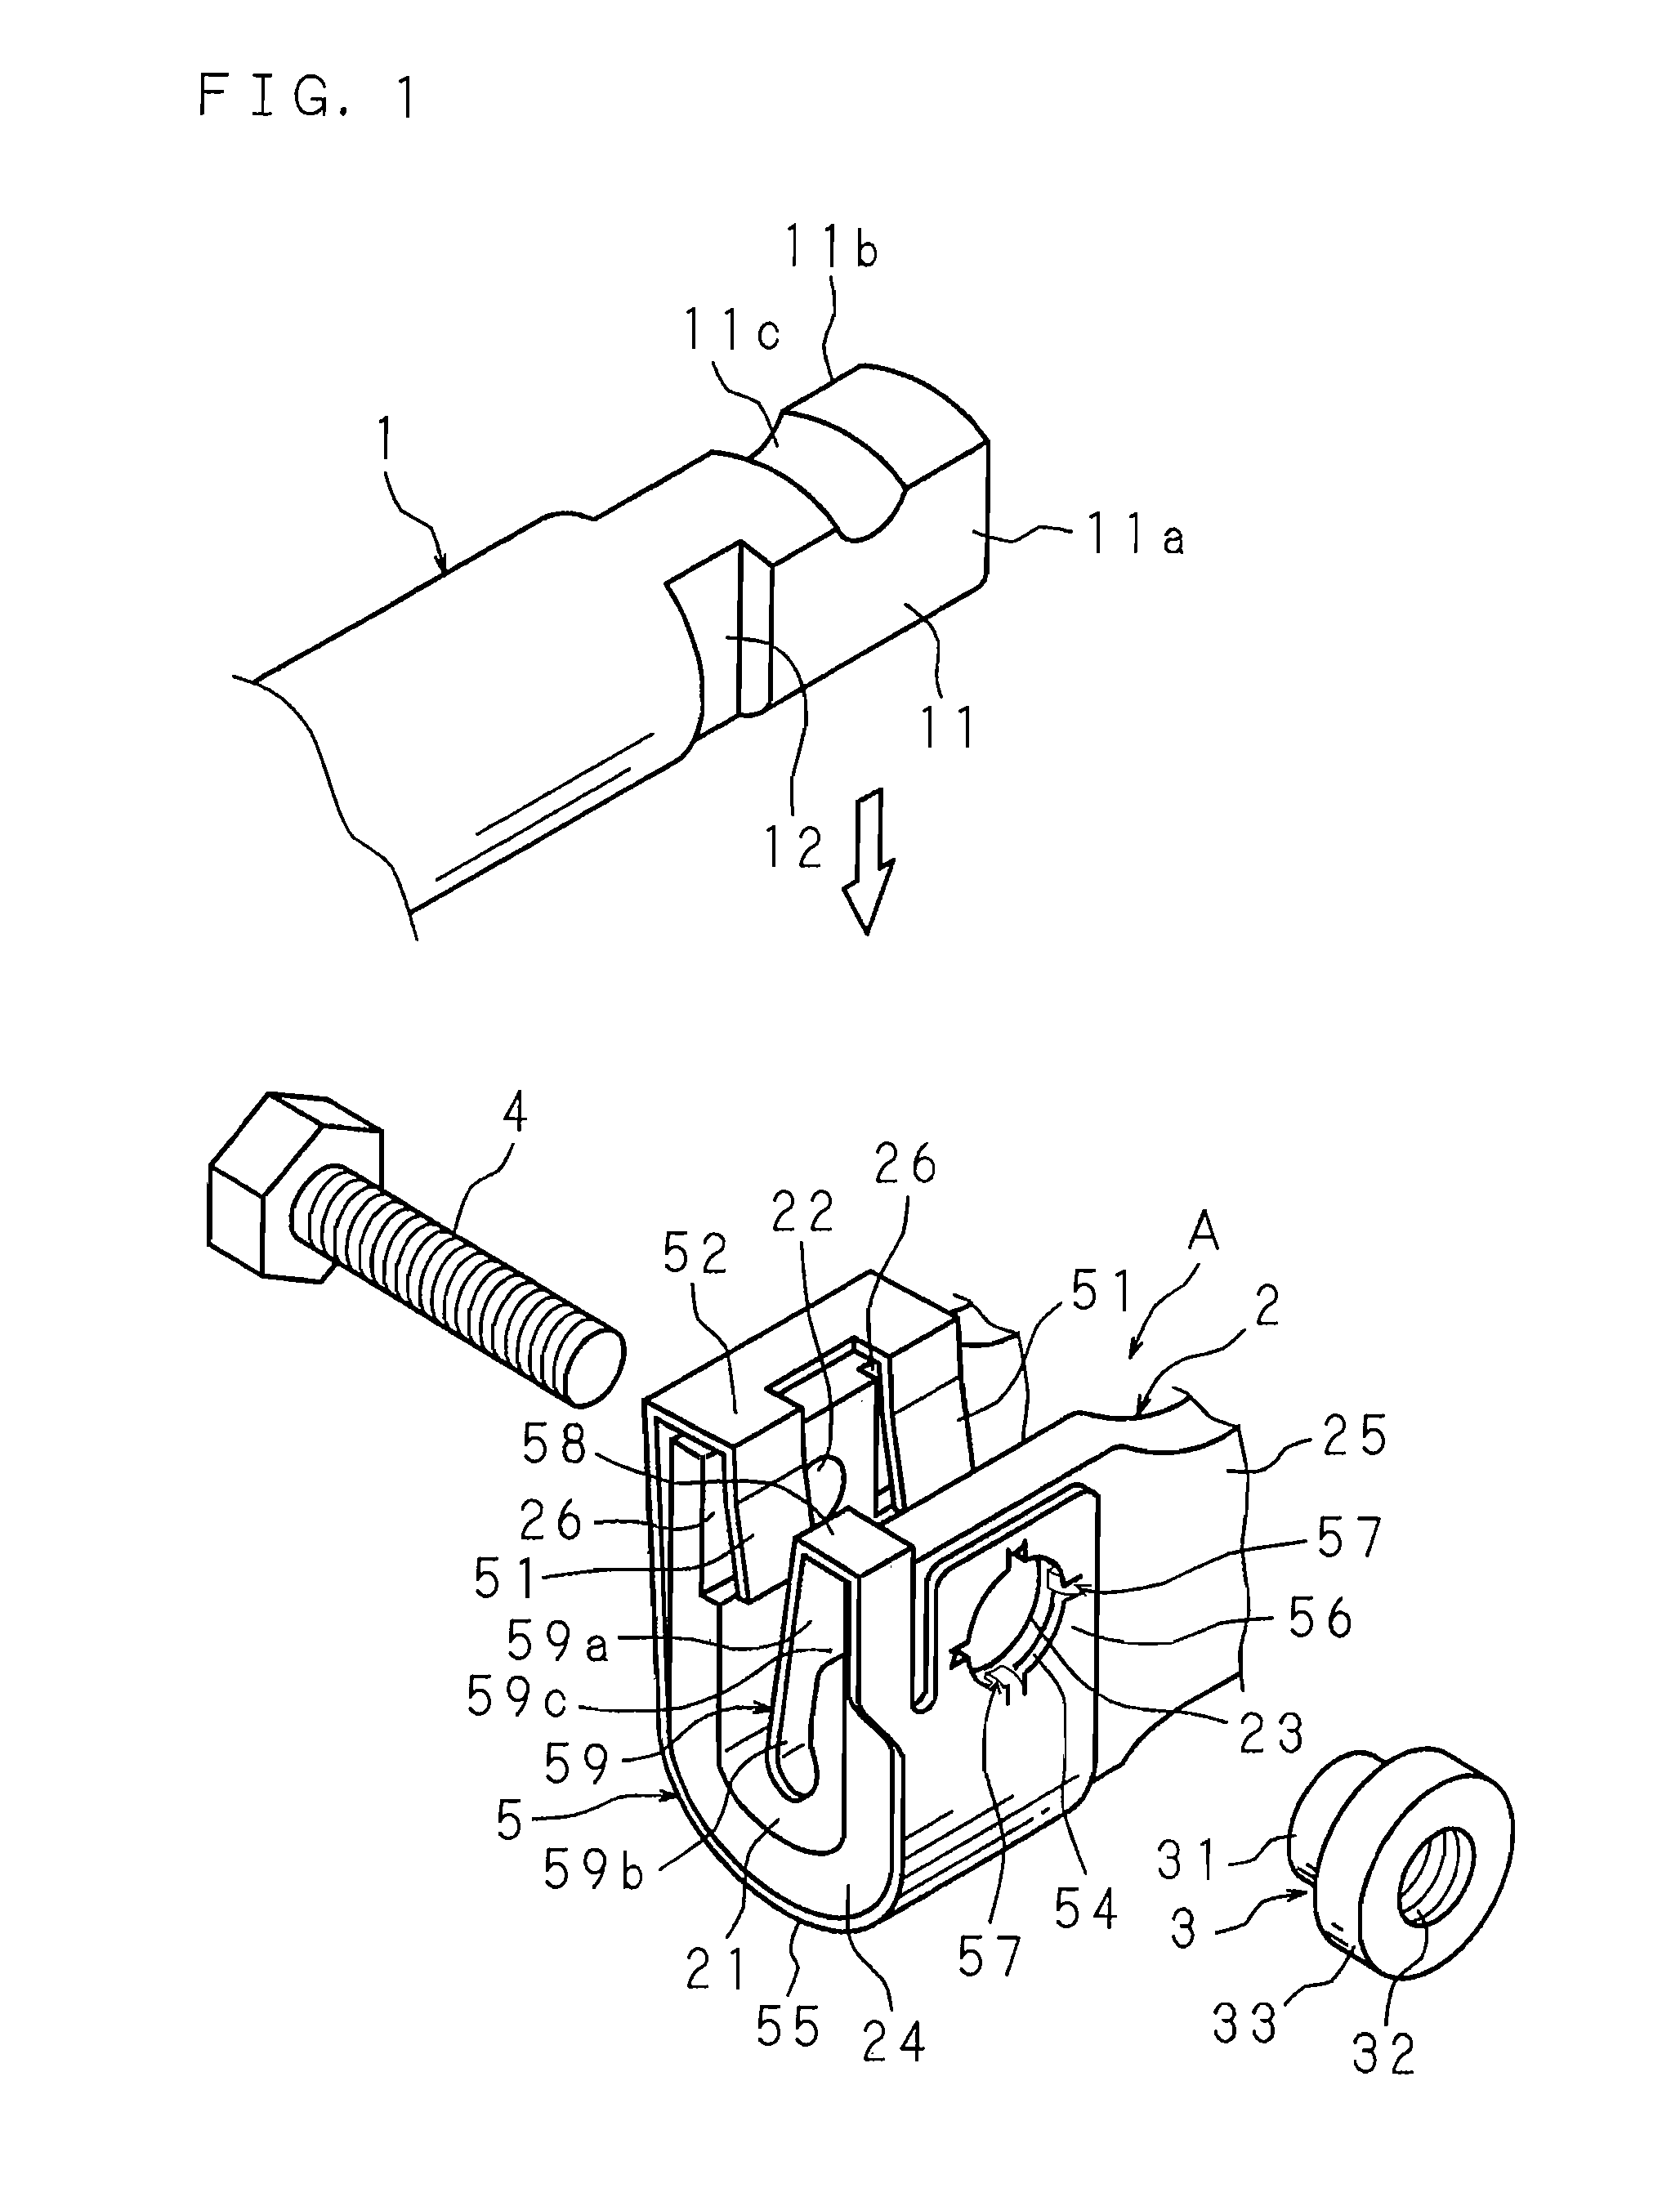 Coupling structure of shaft body and shaft joint